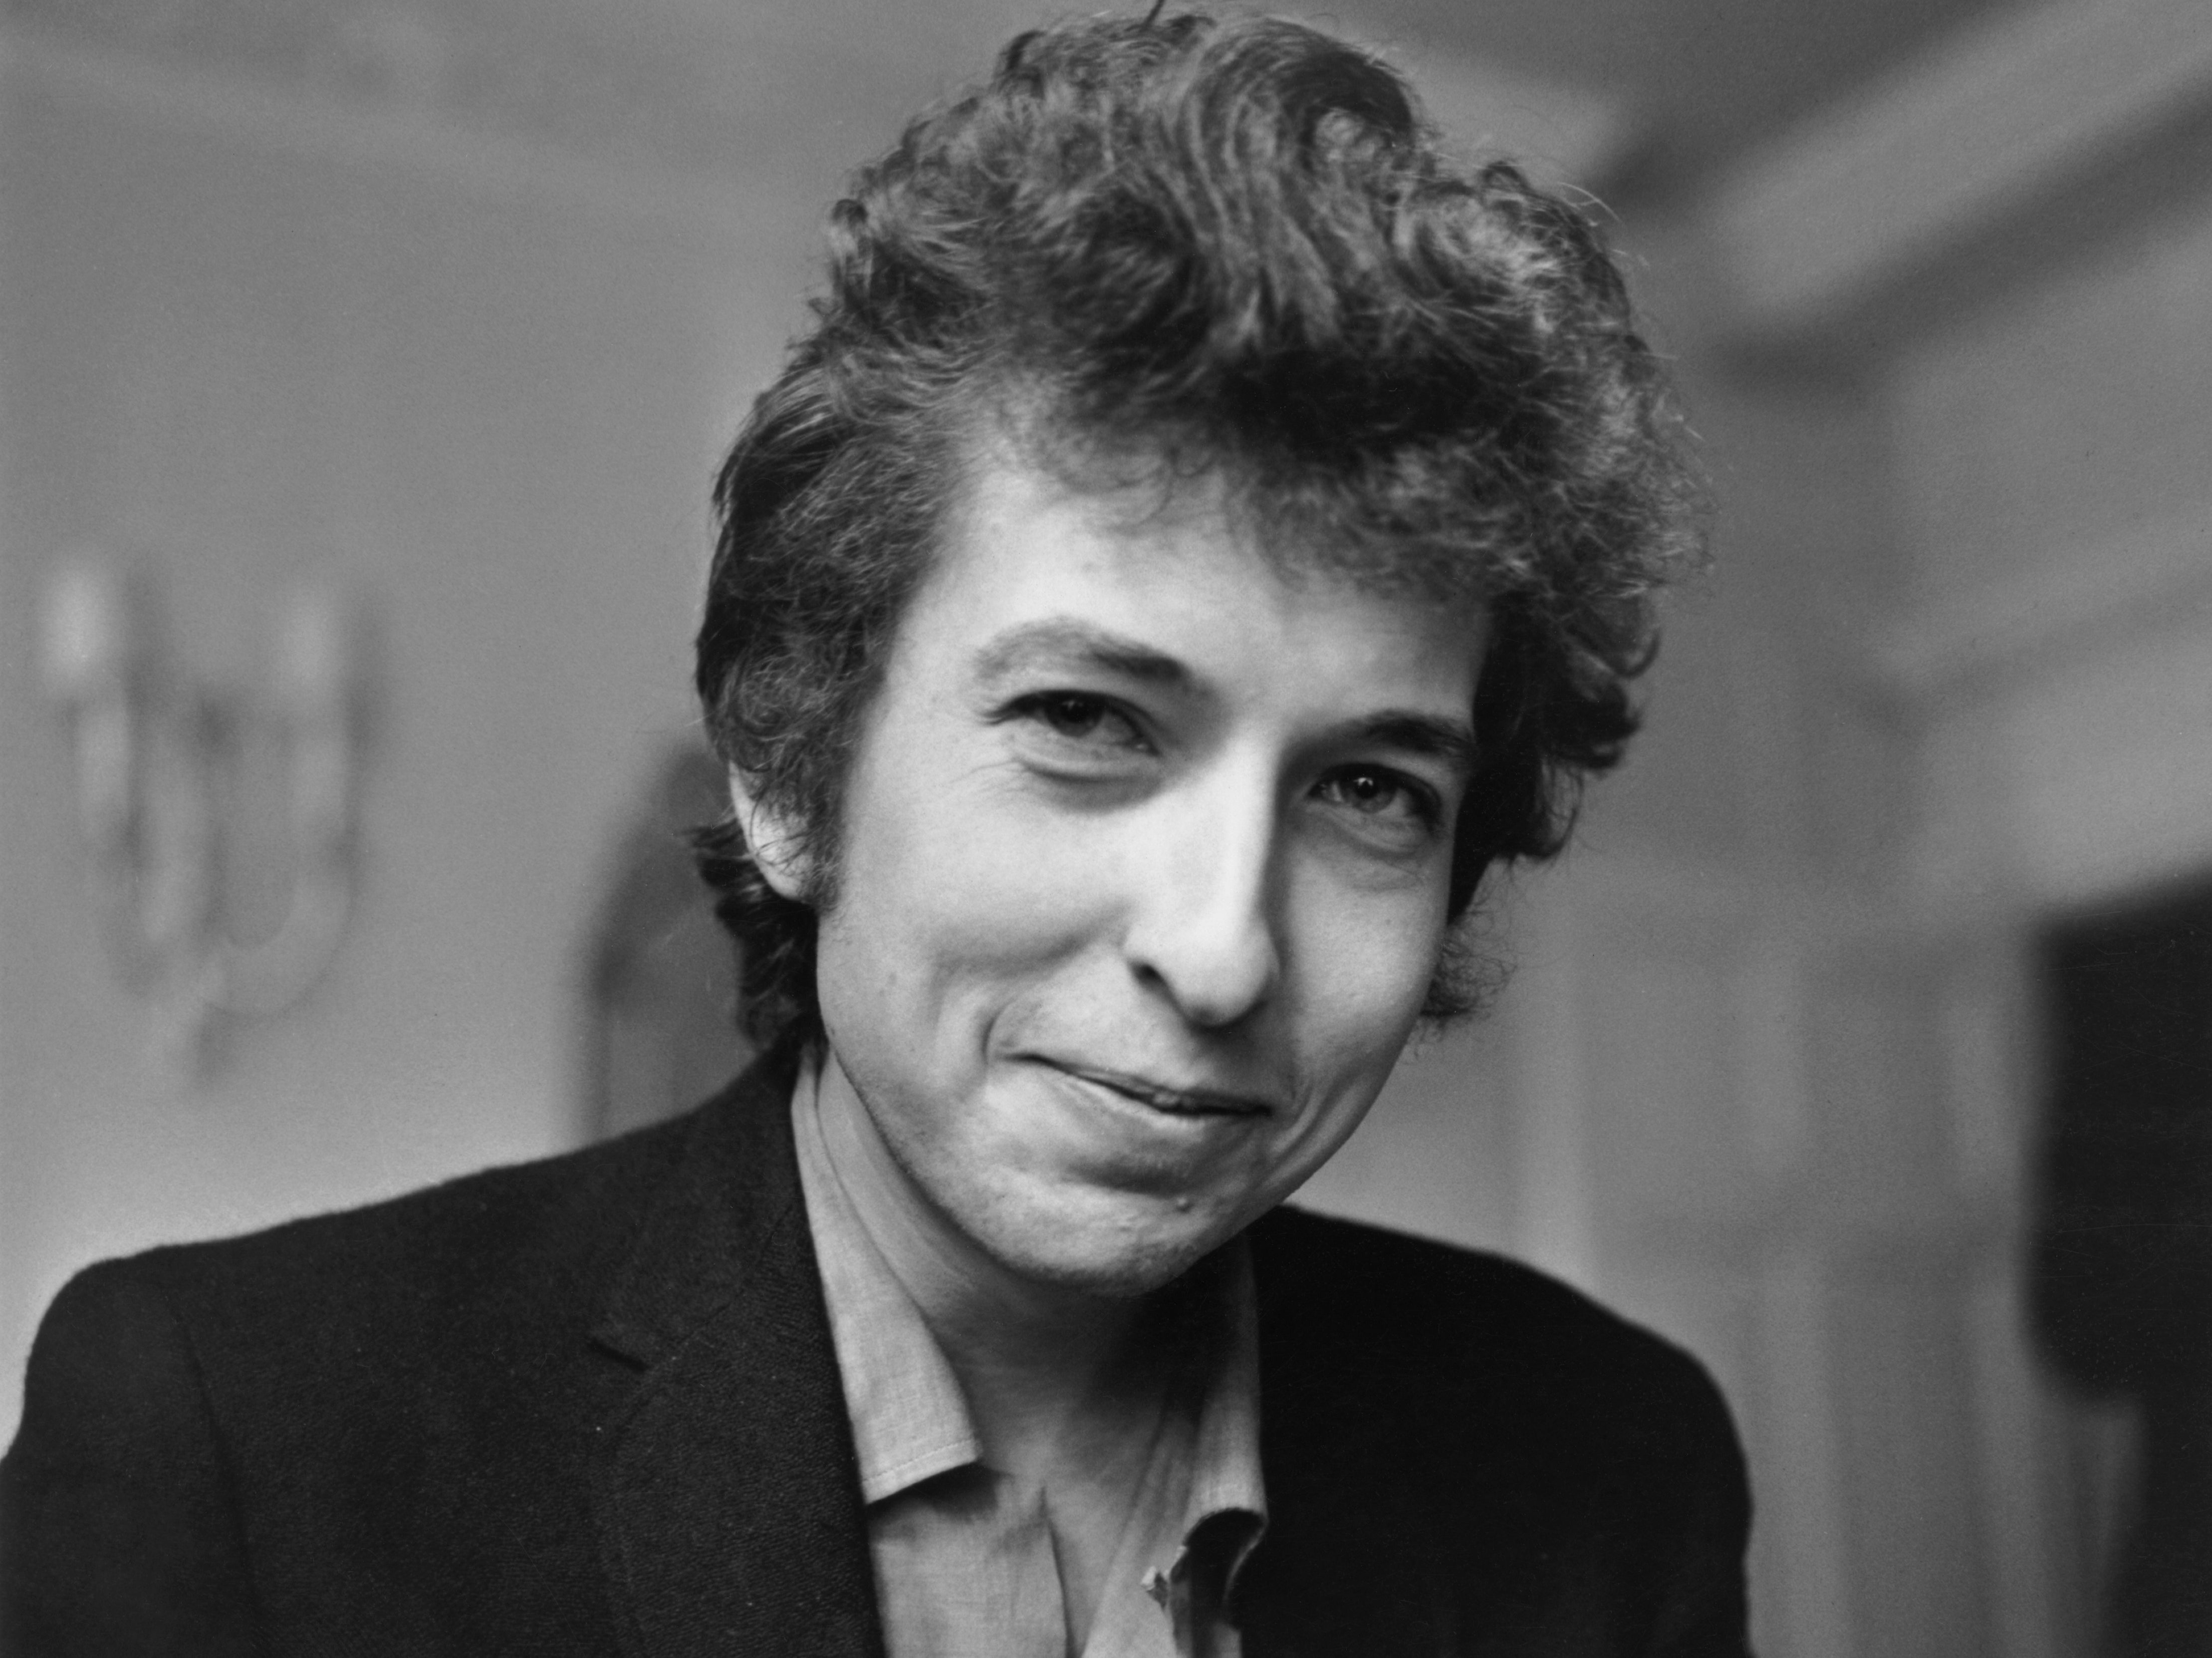 Bob Dylan flashes a rare smile during a meeting with the British press on 28 April 1965